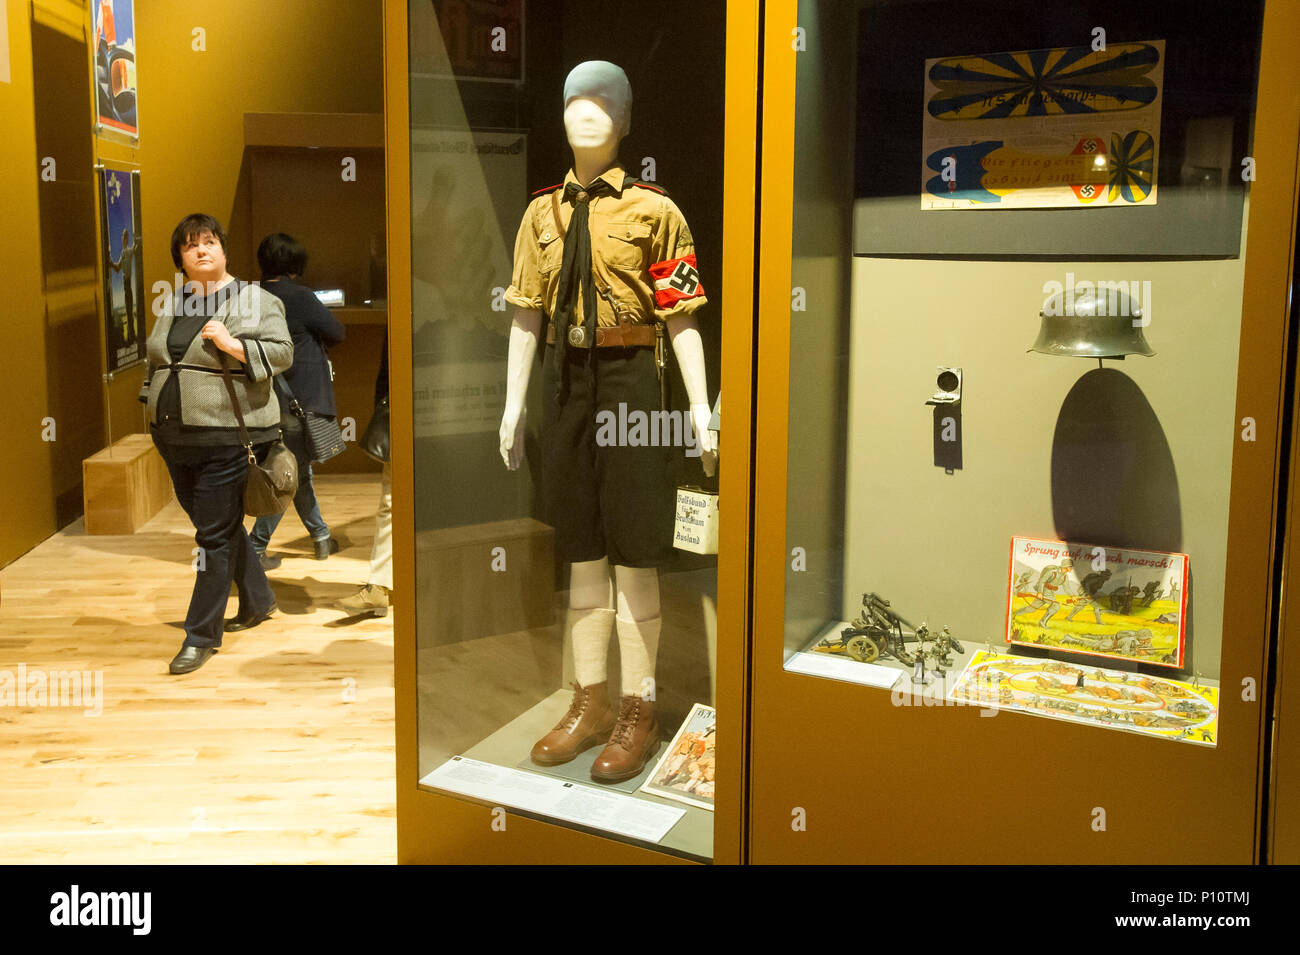 Hitlerjugend as a part of exhibion in Museum of the Second World War in Gdansk, Poland. January 28th 2017 © Wojciech Strozyk / Alamy Stock Photo Stock Photo